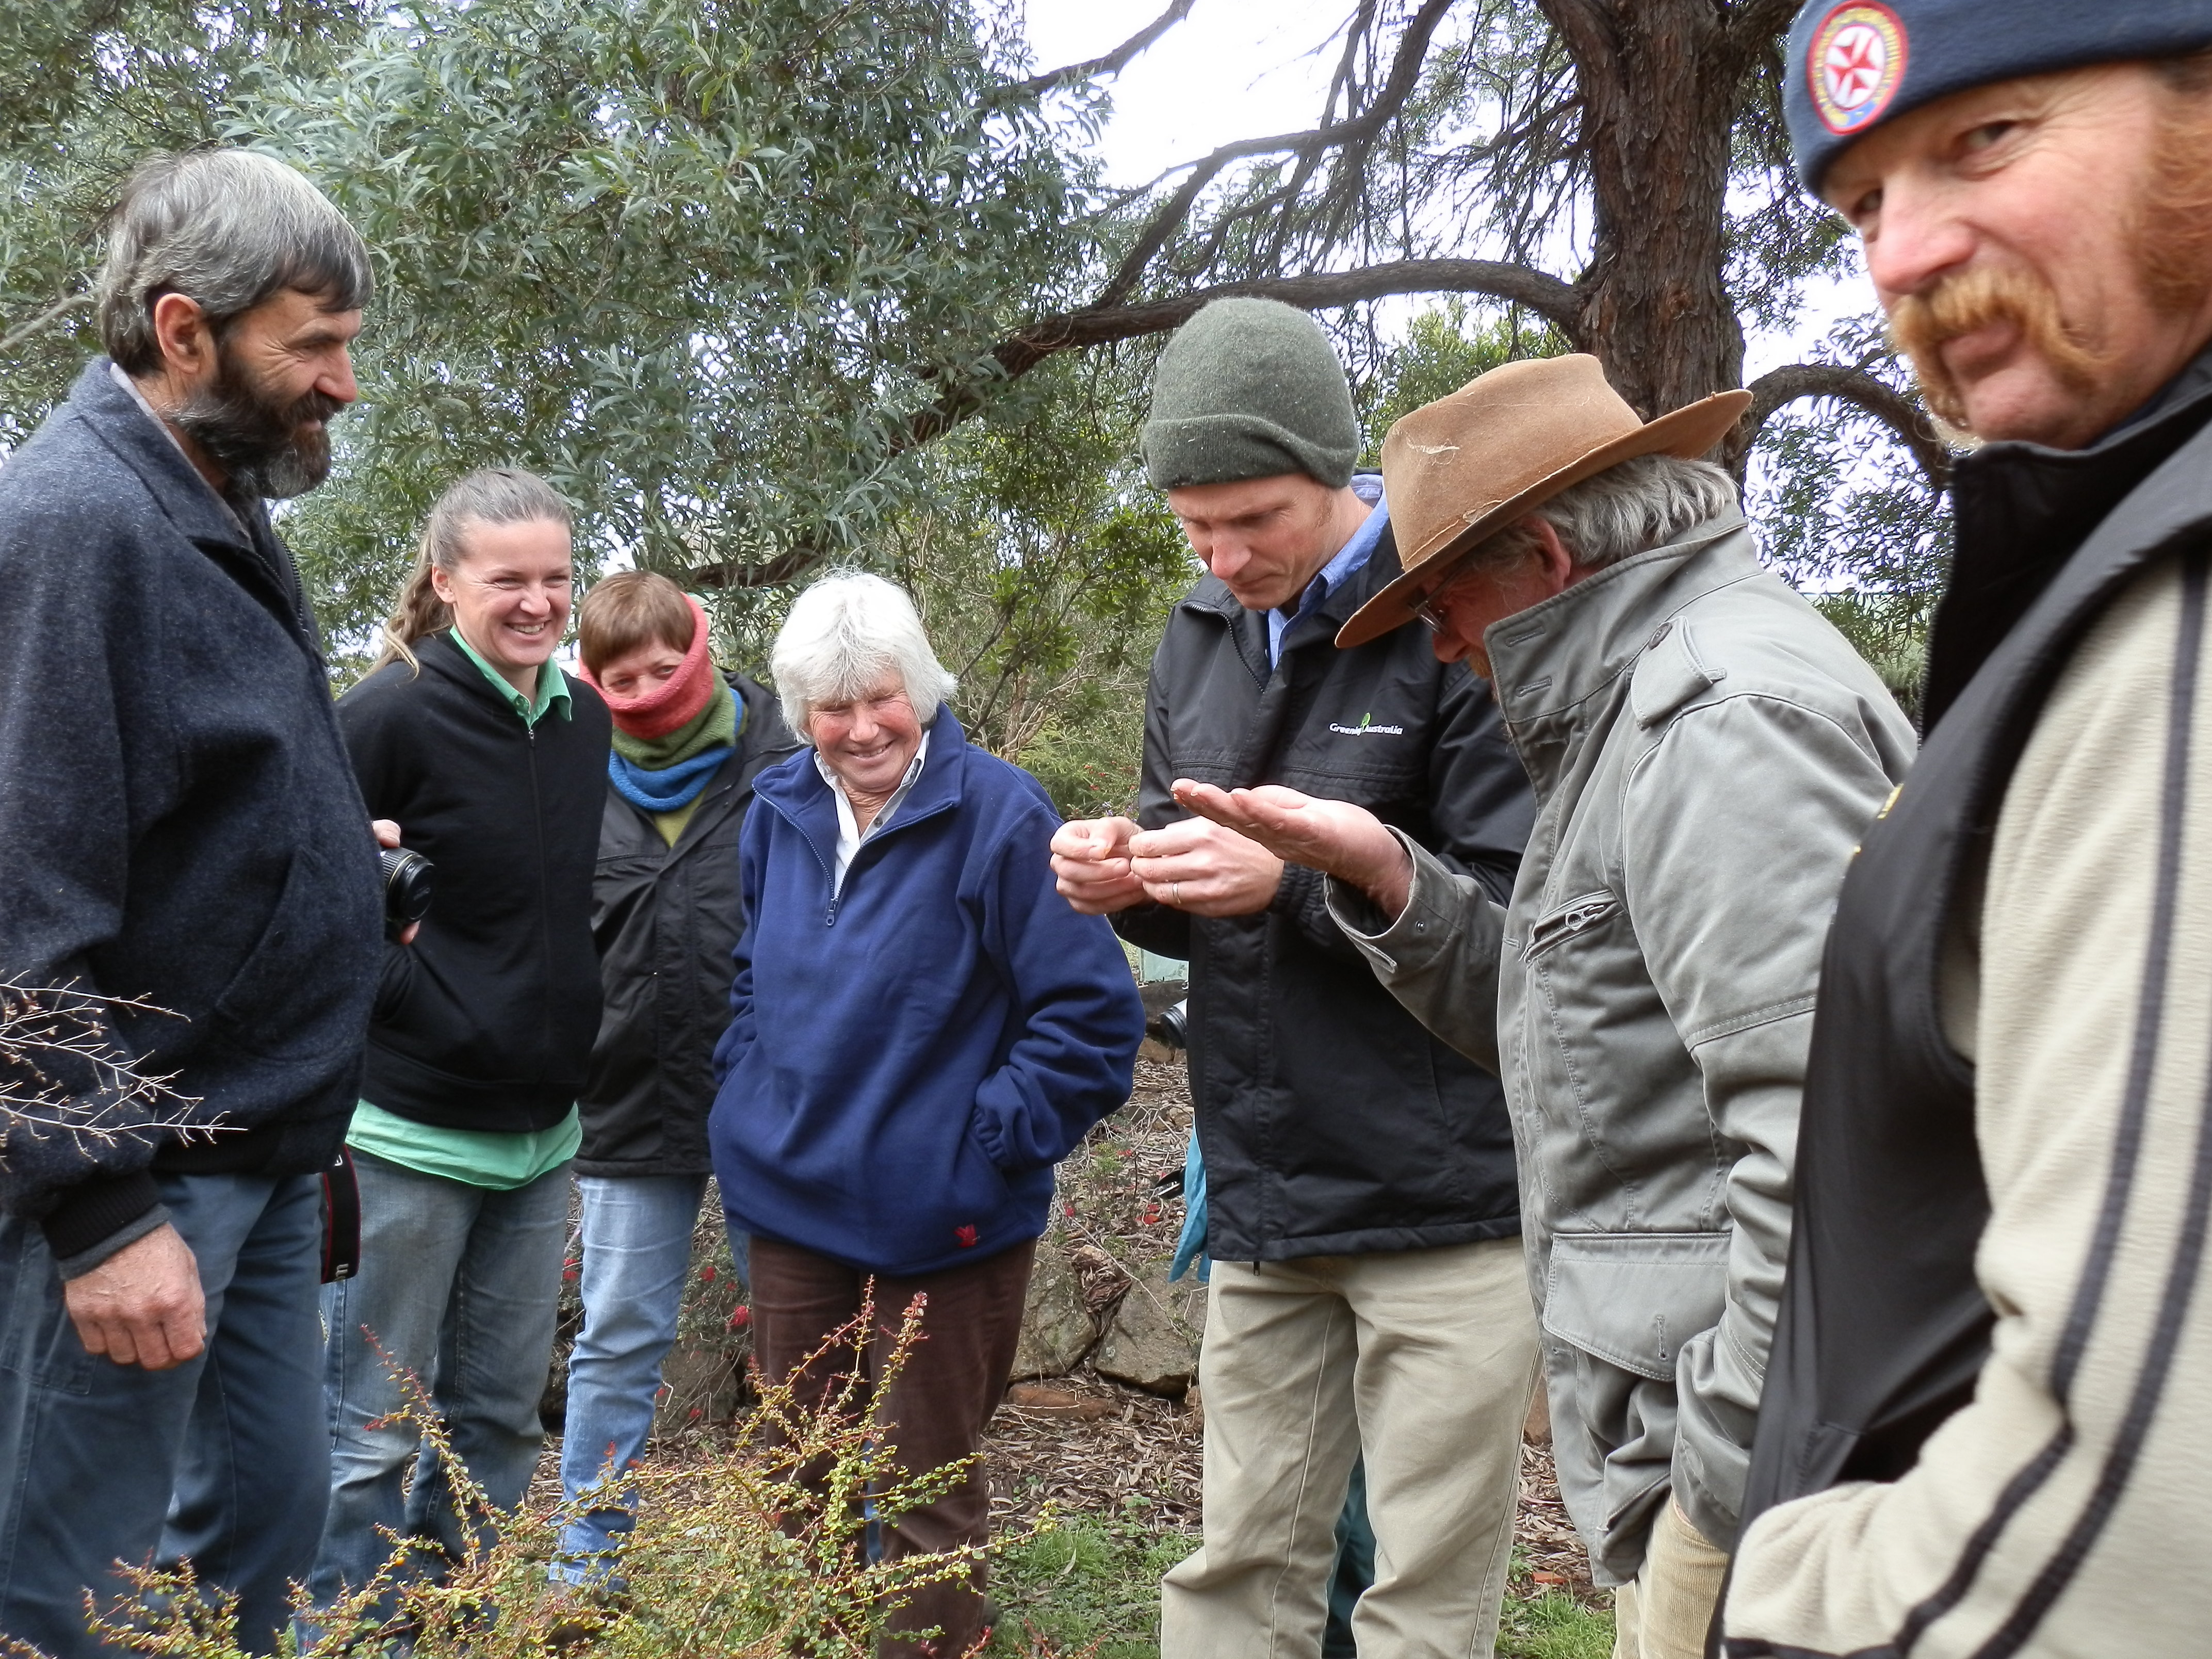 Seed collection training @ Burrendong Arboretum